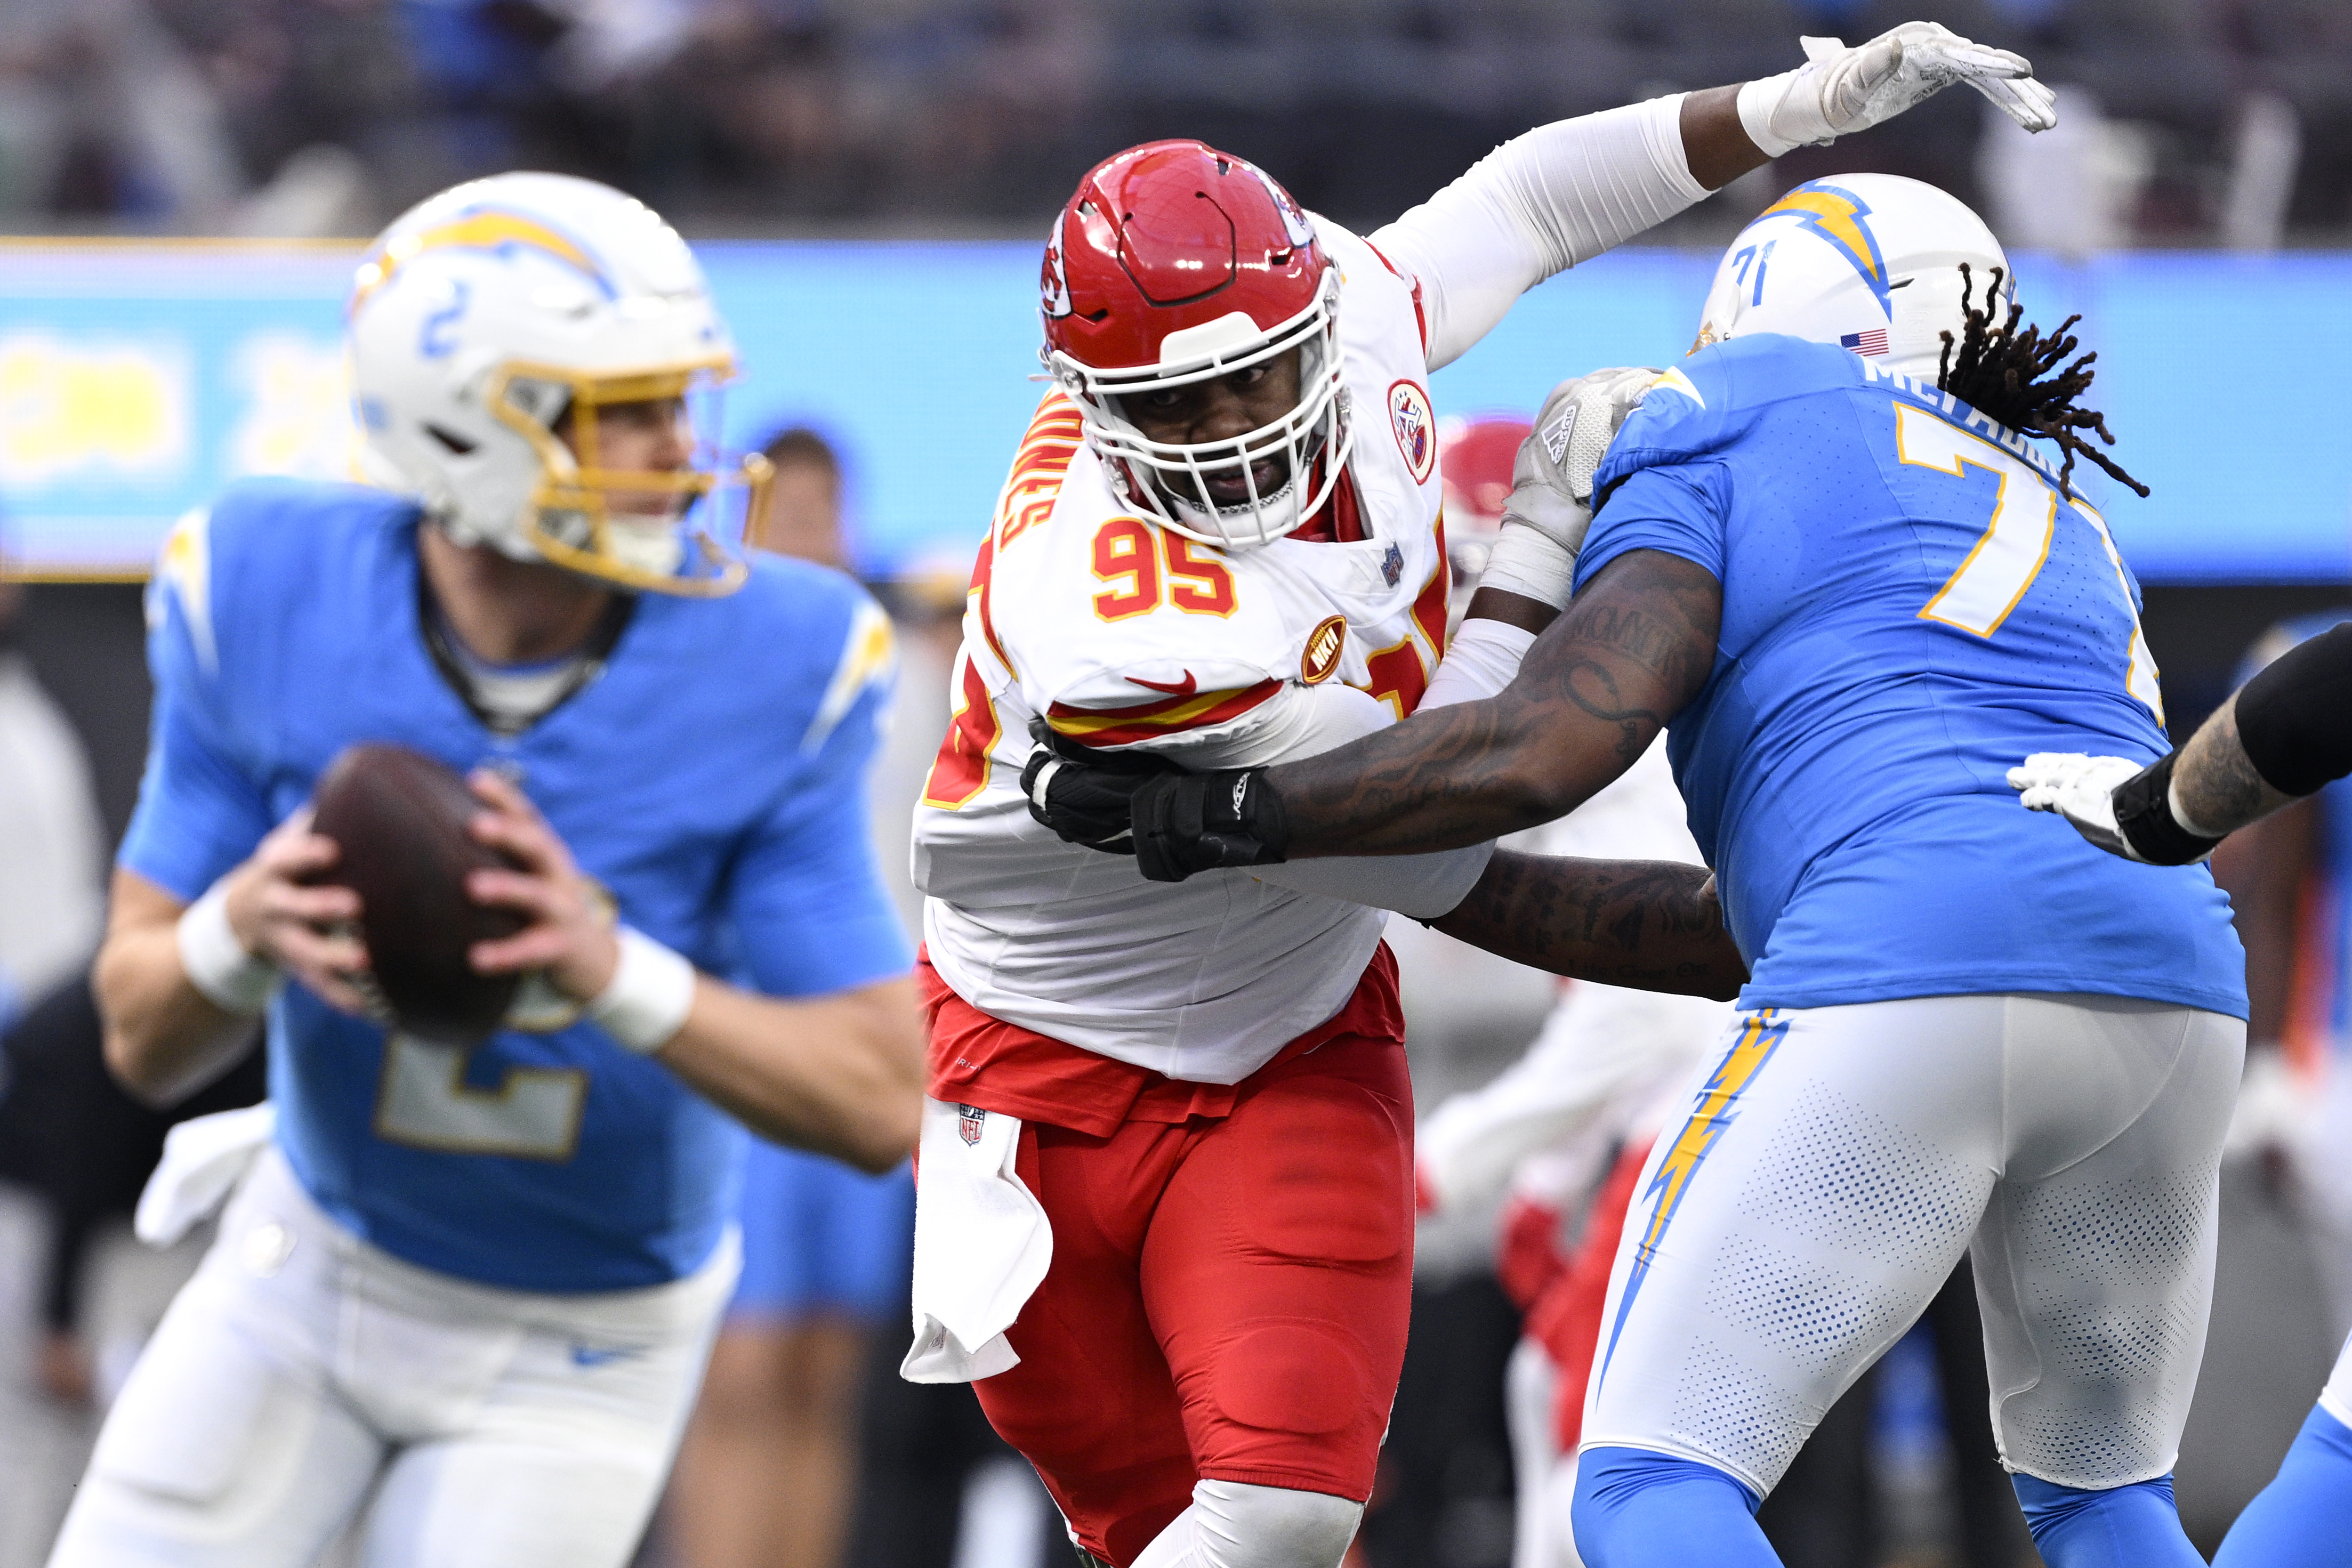 Chris Jones pushes past a Chargers player to try to sack the QB